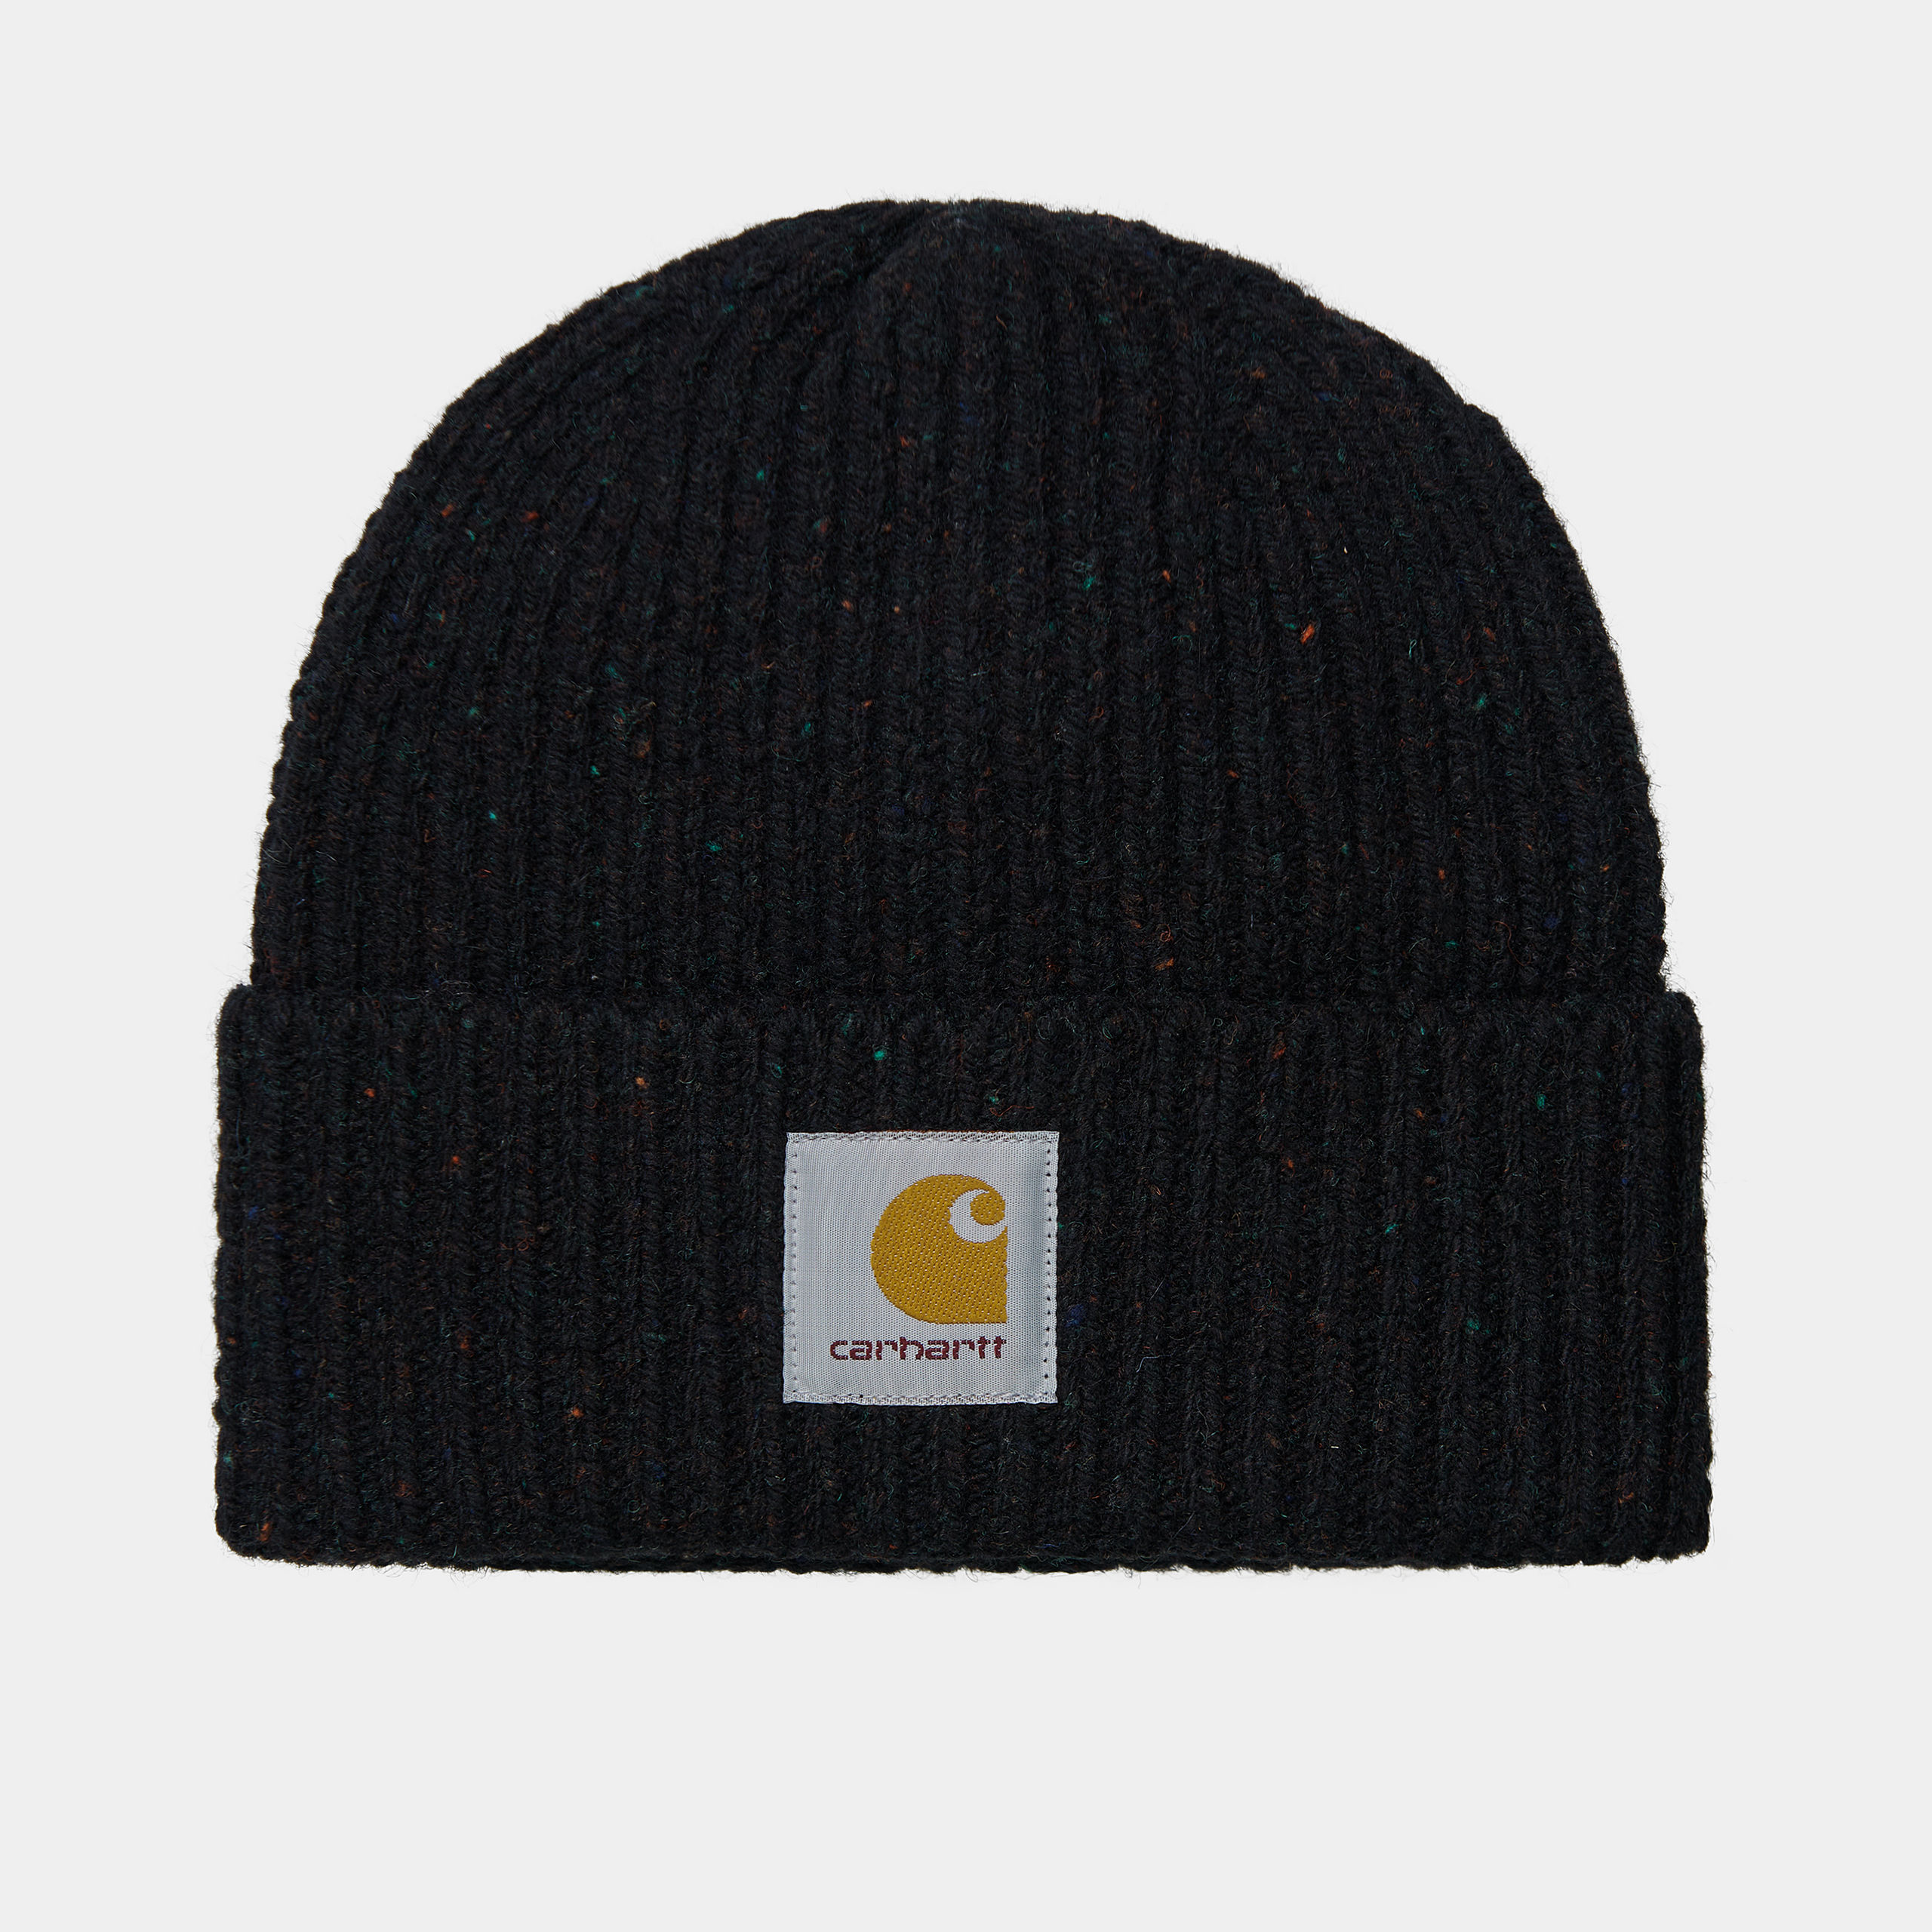 Carhartt WIP - ANGLISTIC BEANIE - Speckled Black